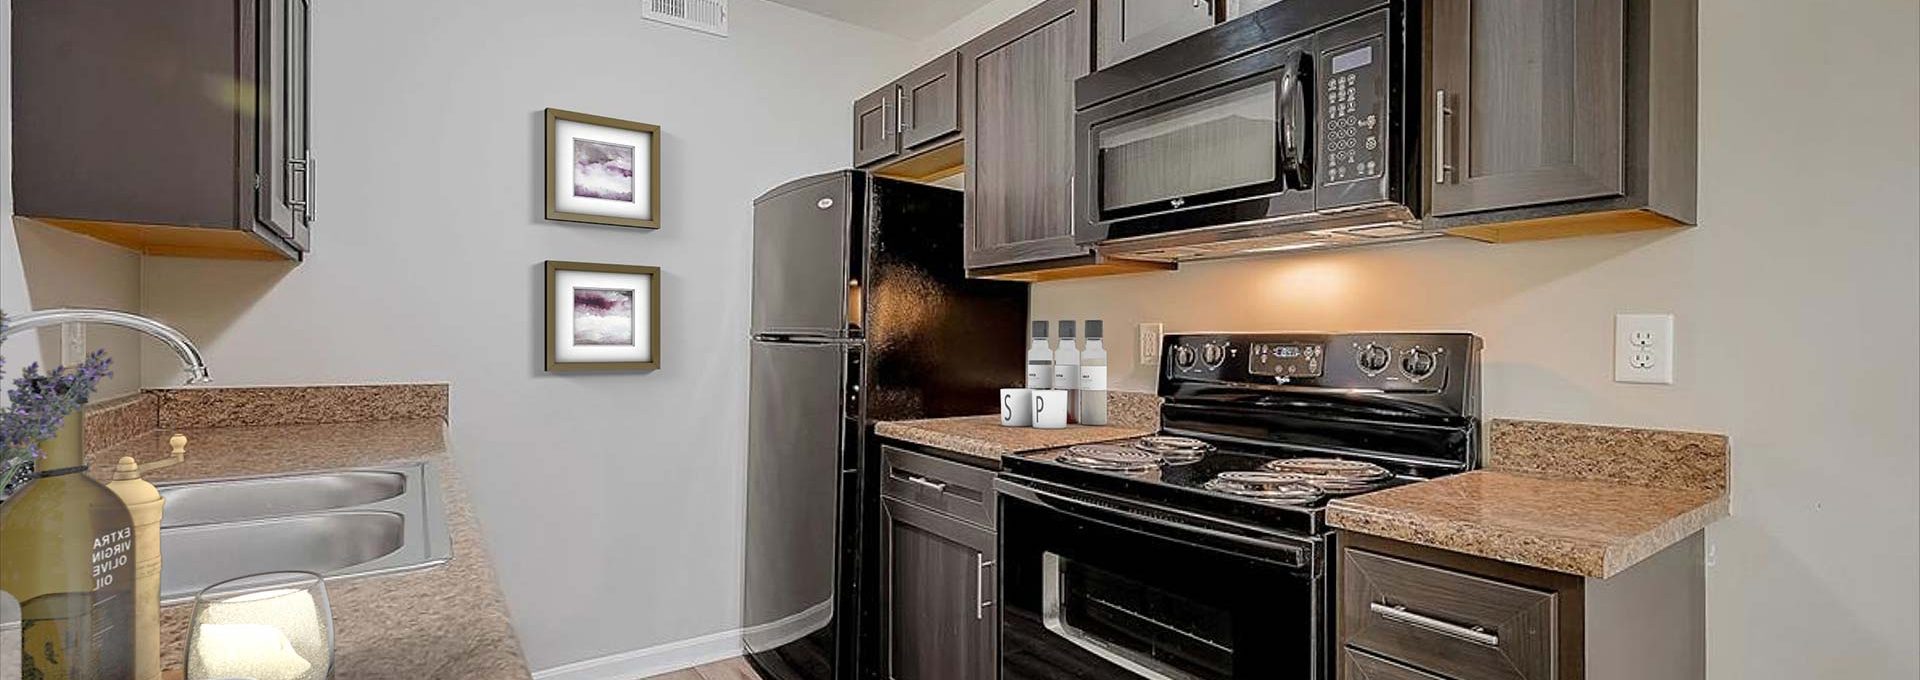 kitchen with black appliances and granite counter tops at The Worthington Green